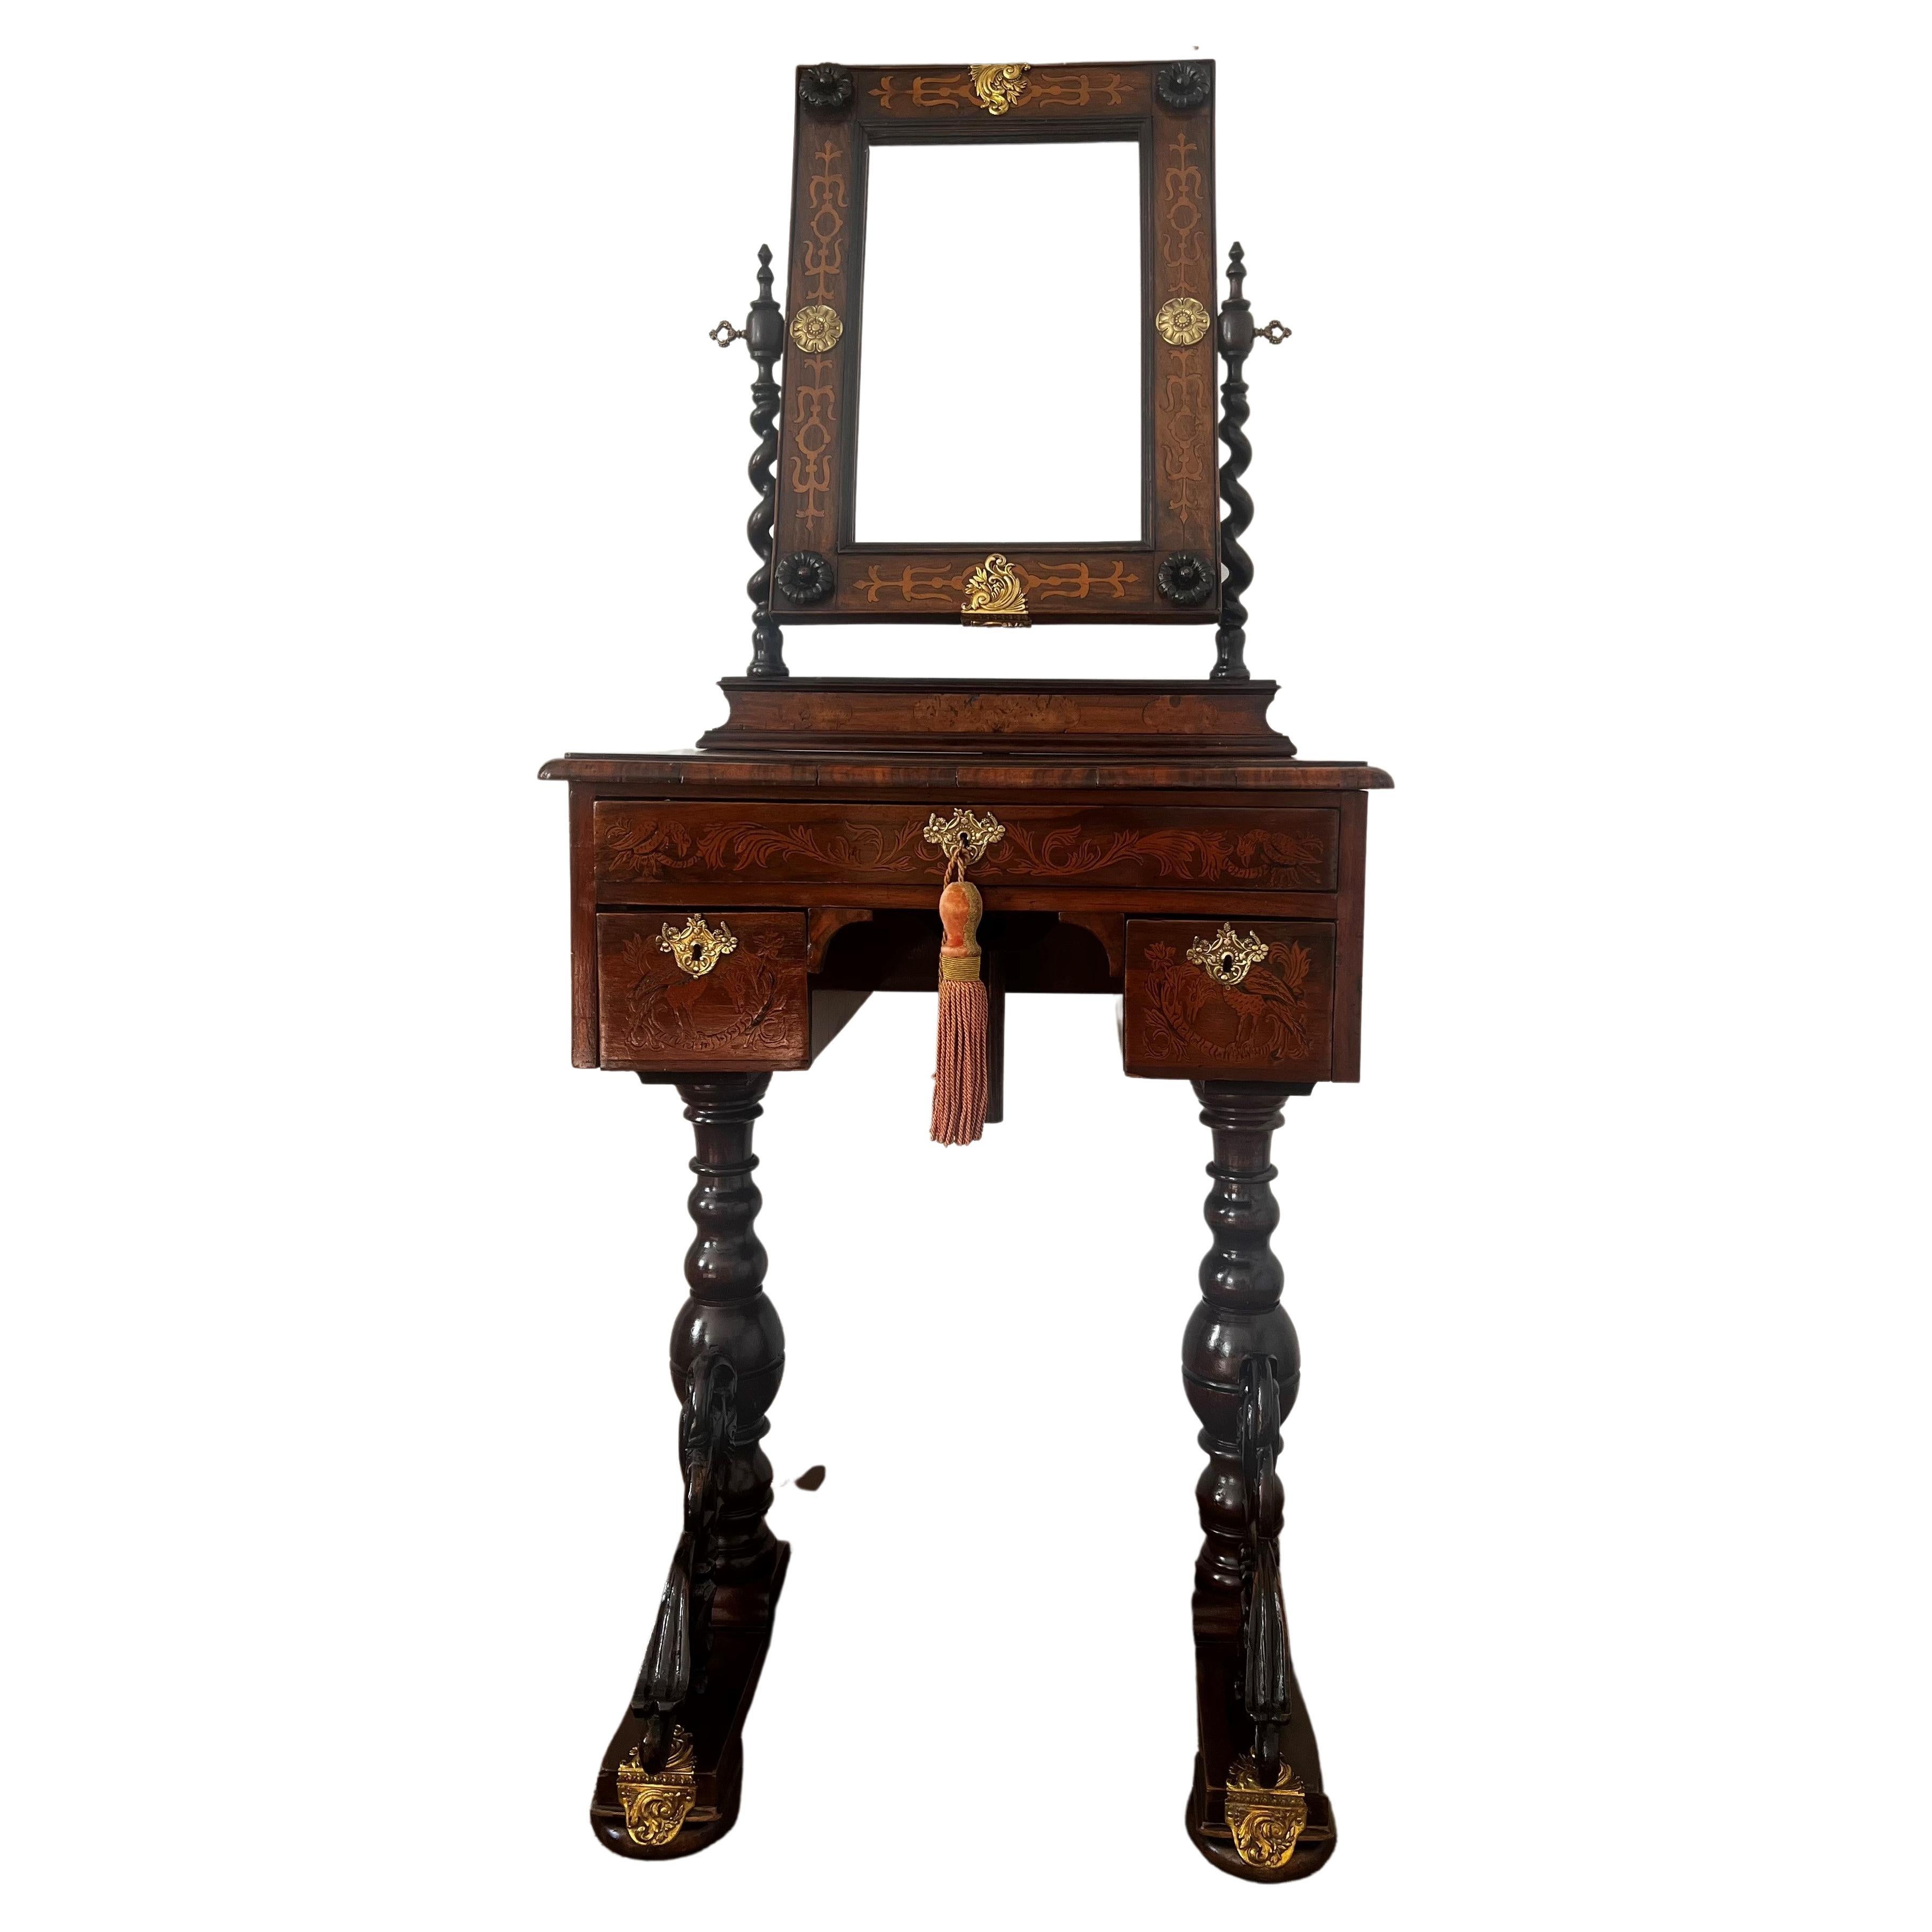 Antique 18th century baroque Dressing Table with Mirror